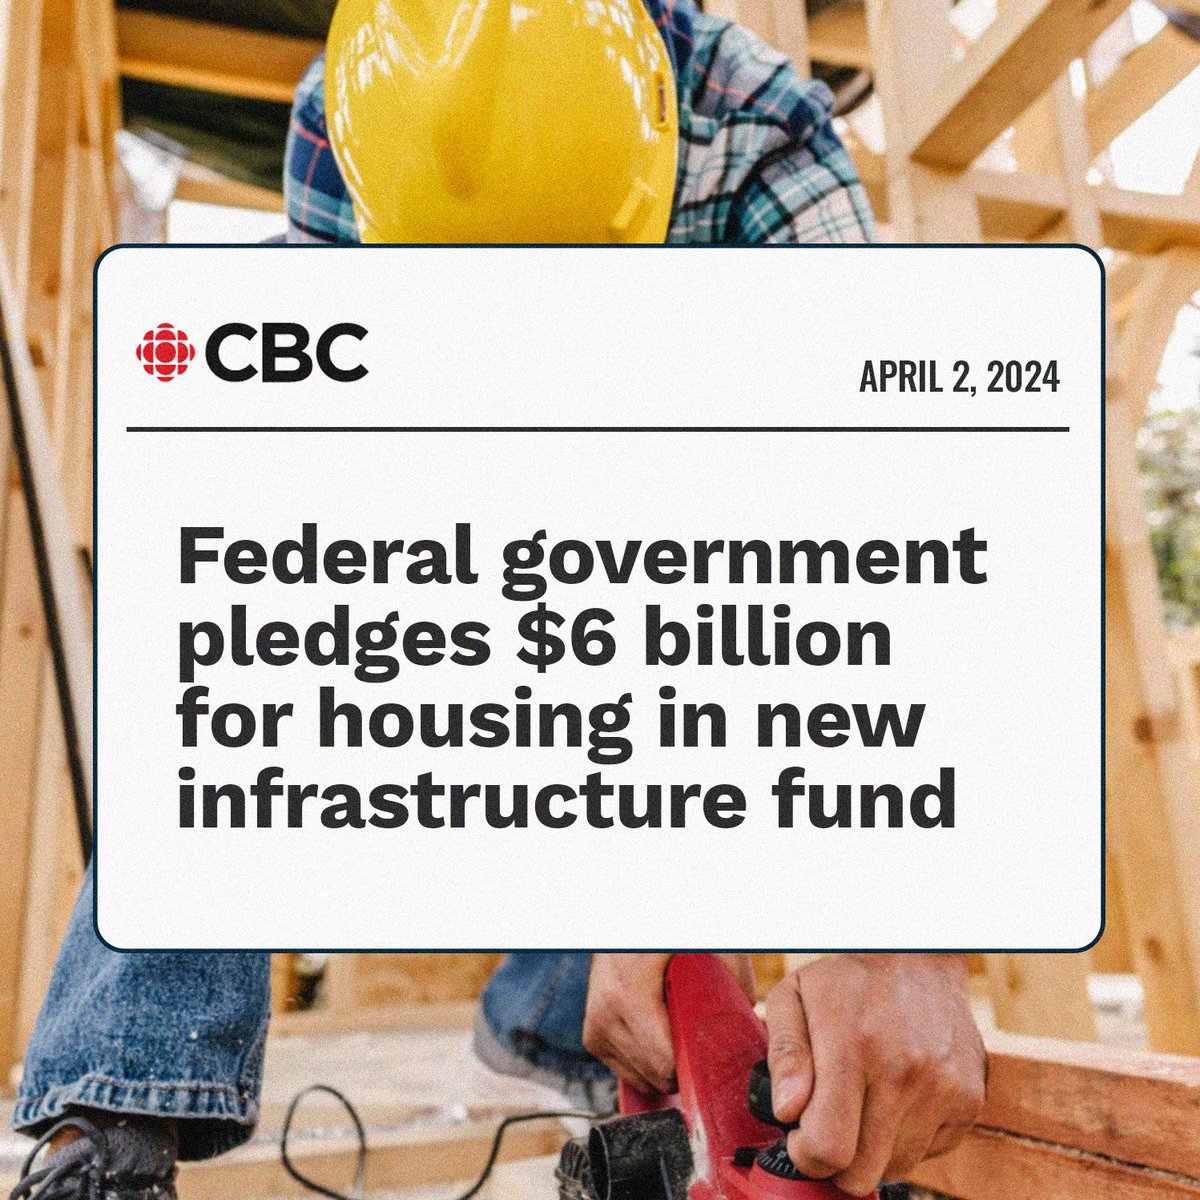 To build more homes faster, we need to accelerate the construction & upgrading of critical housing infrastructure like water and waste water. That's why we just announced a new $6 billion fund to support the construction of new homes in partnership w/ provinces & municipalities.